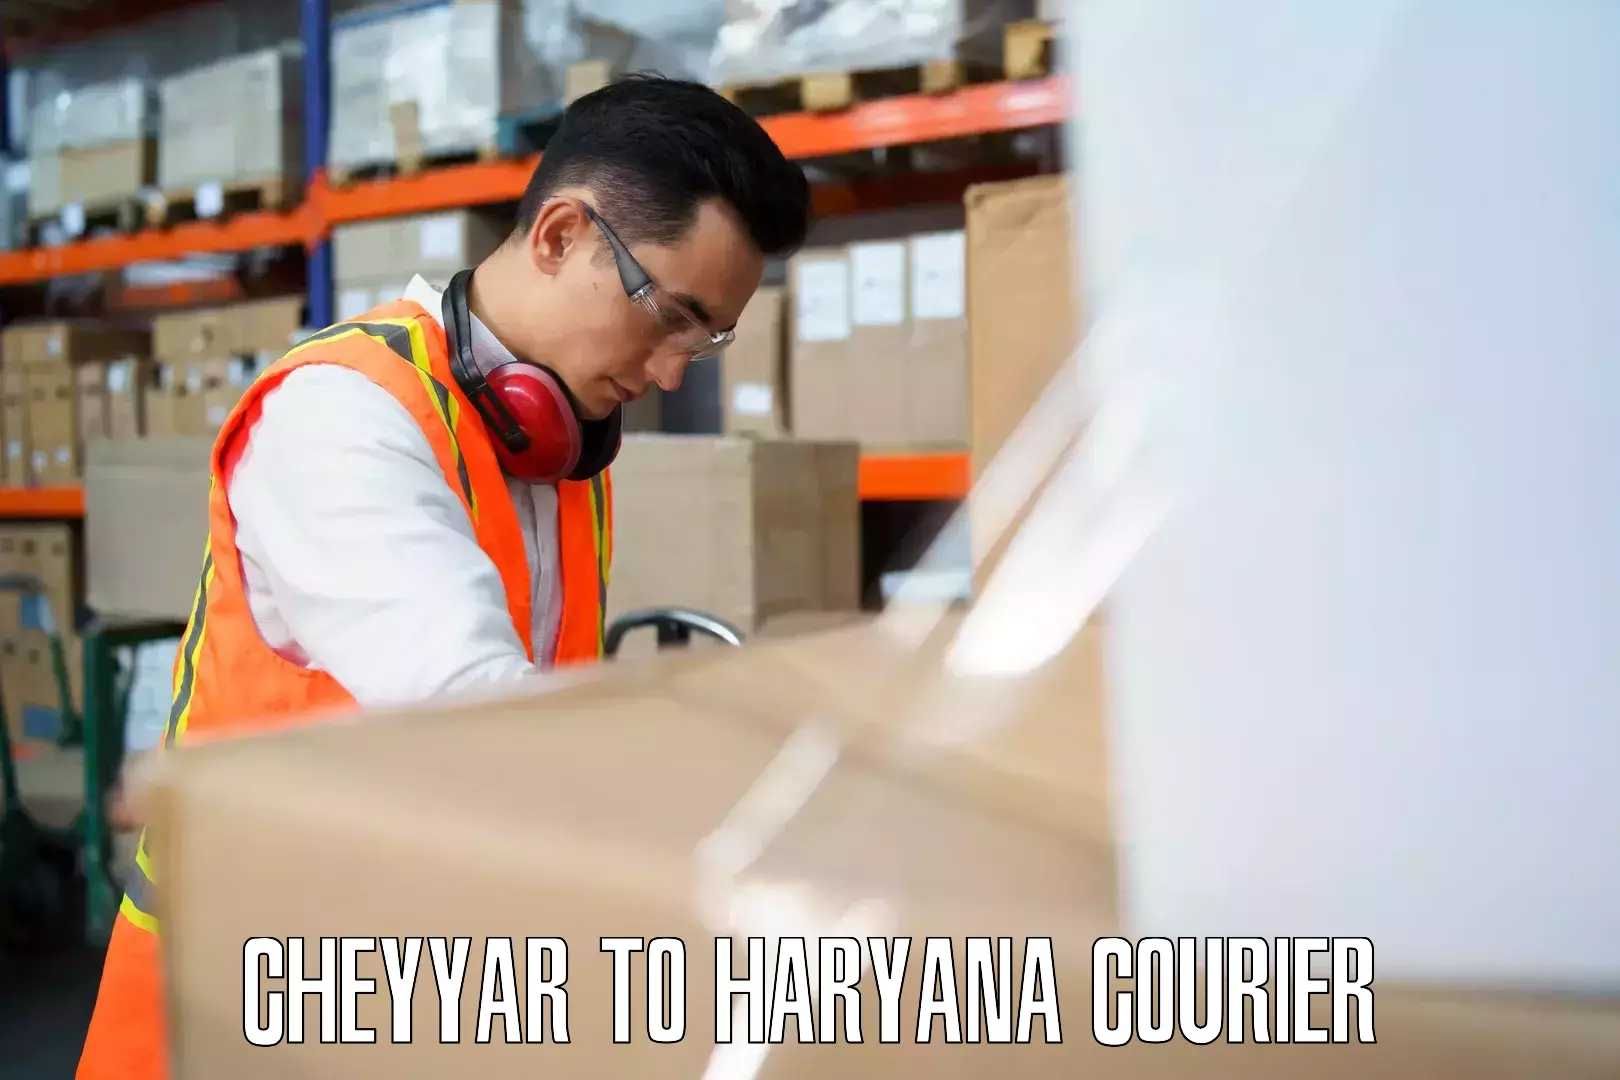 Luggage shipping specialists Cheyyar to Haryana